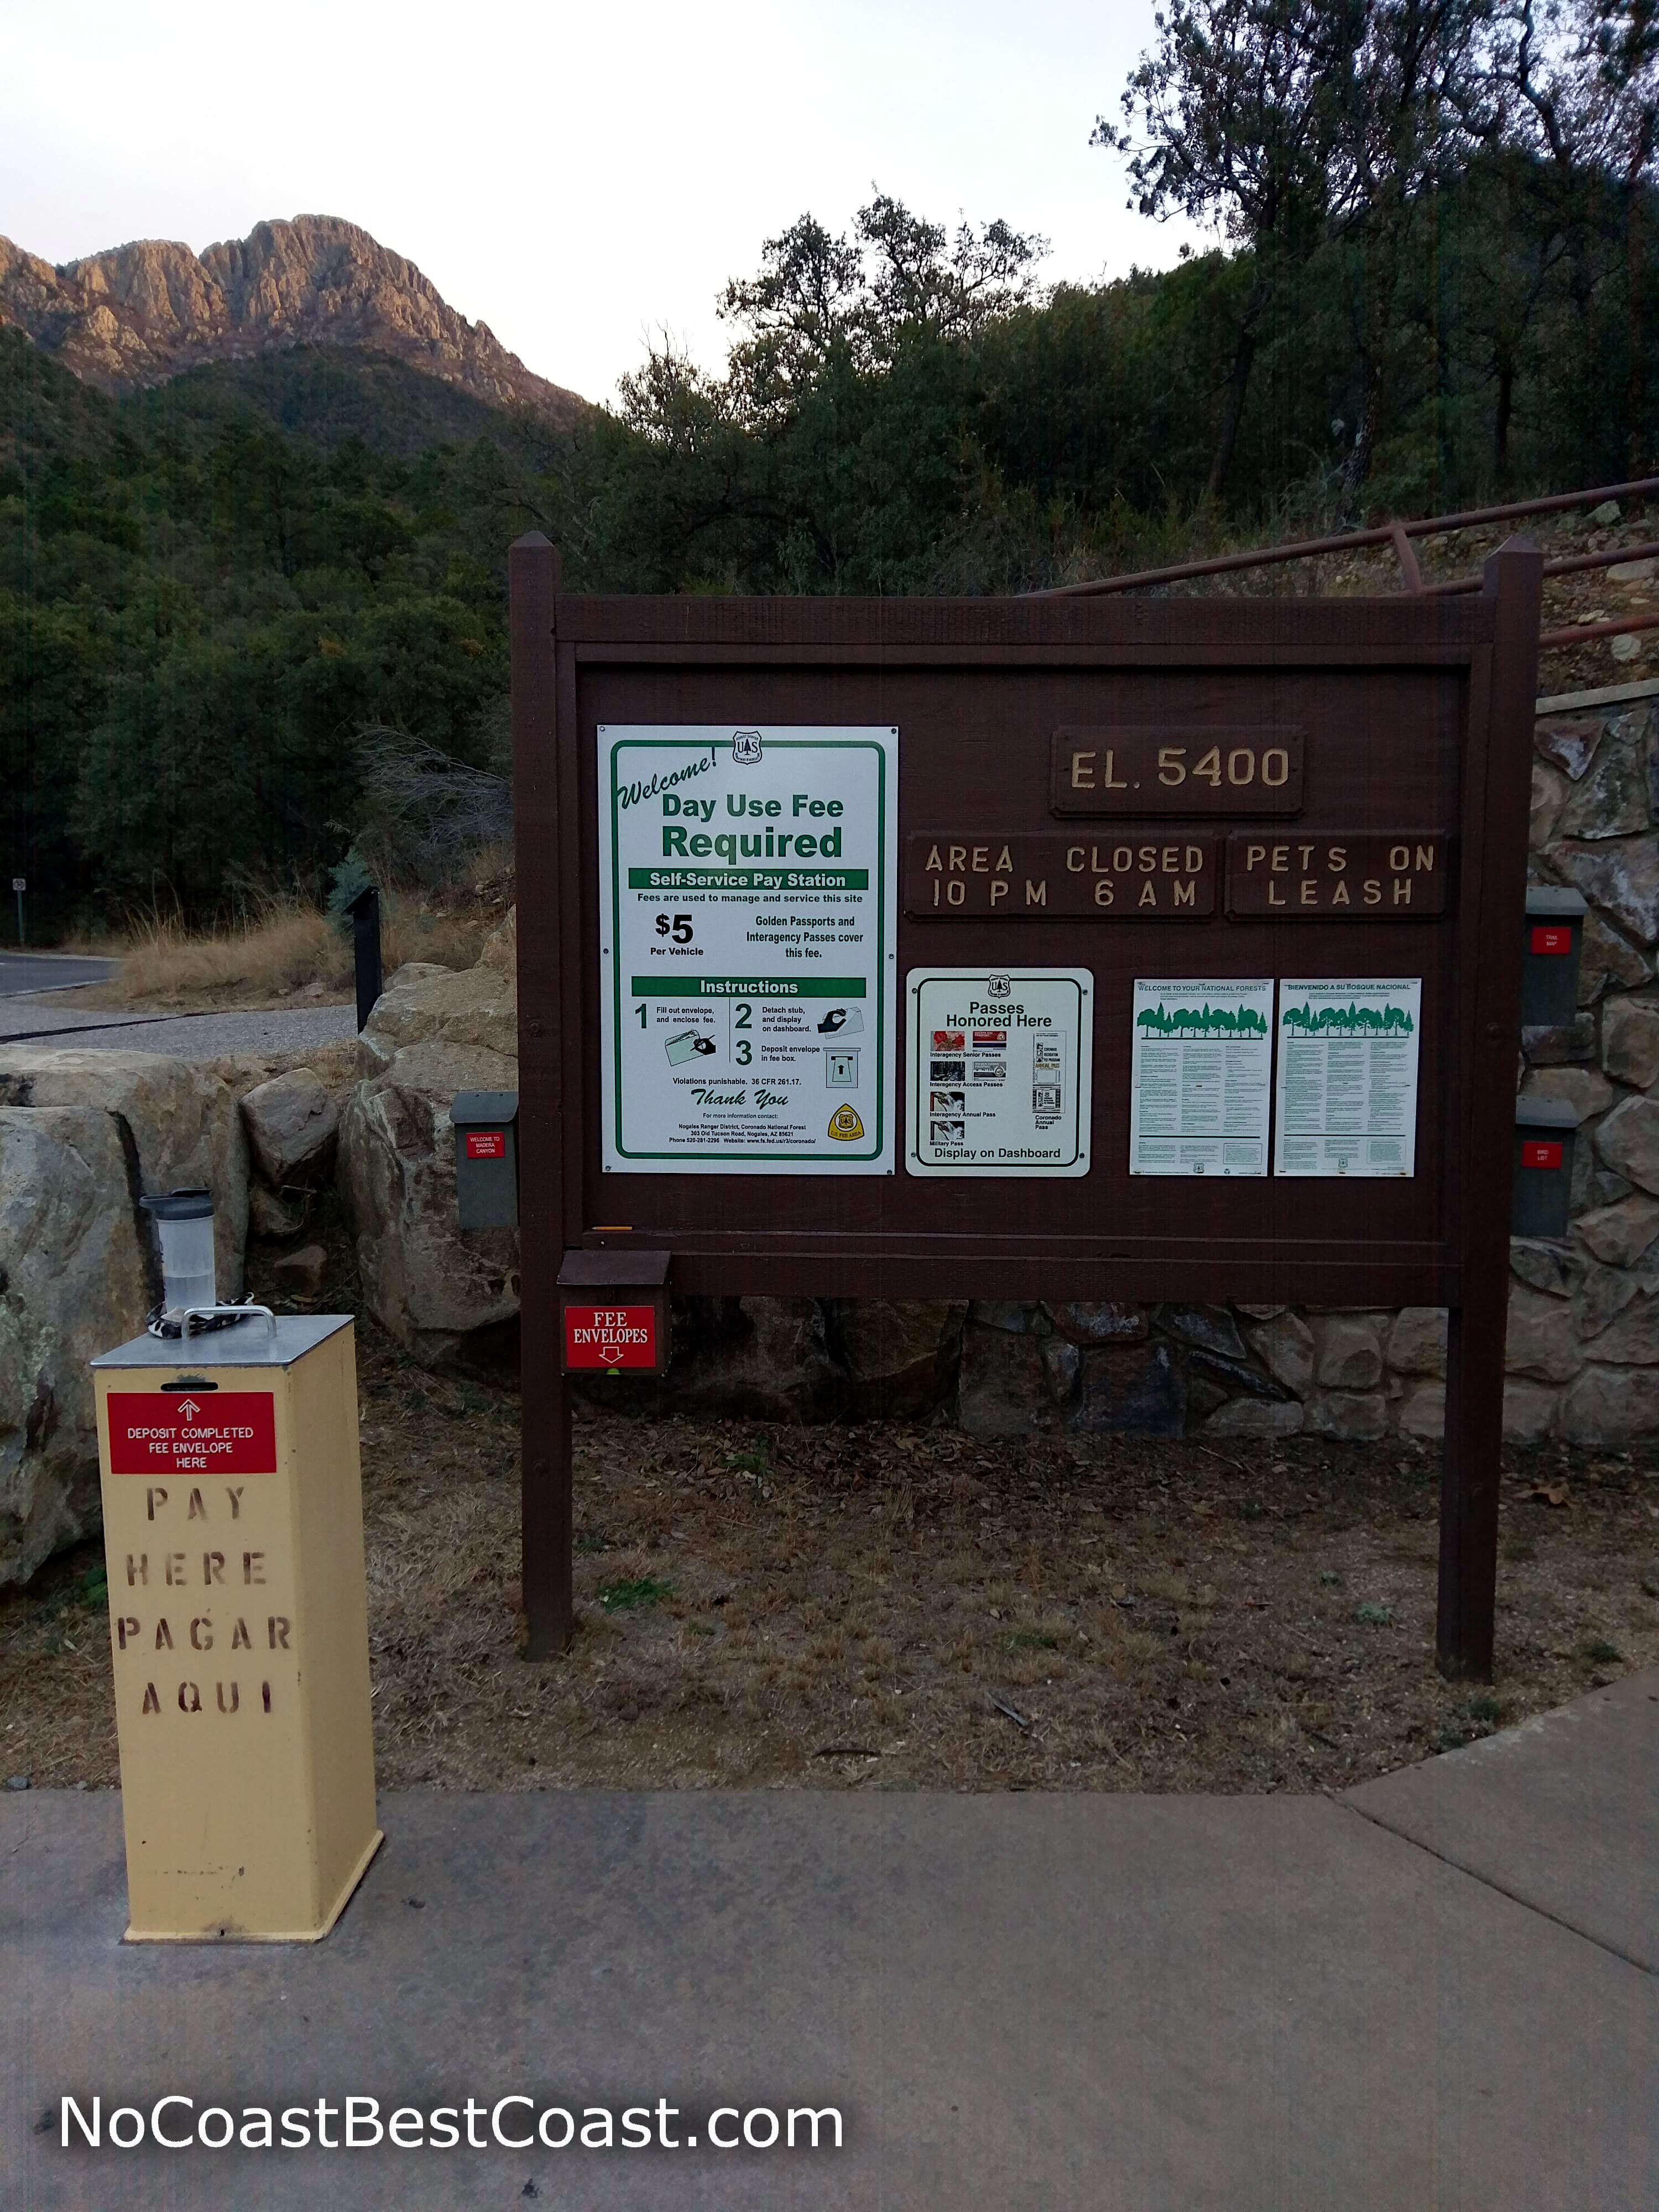 The pay station near the Old Baldy Trailhead